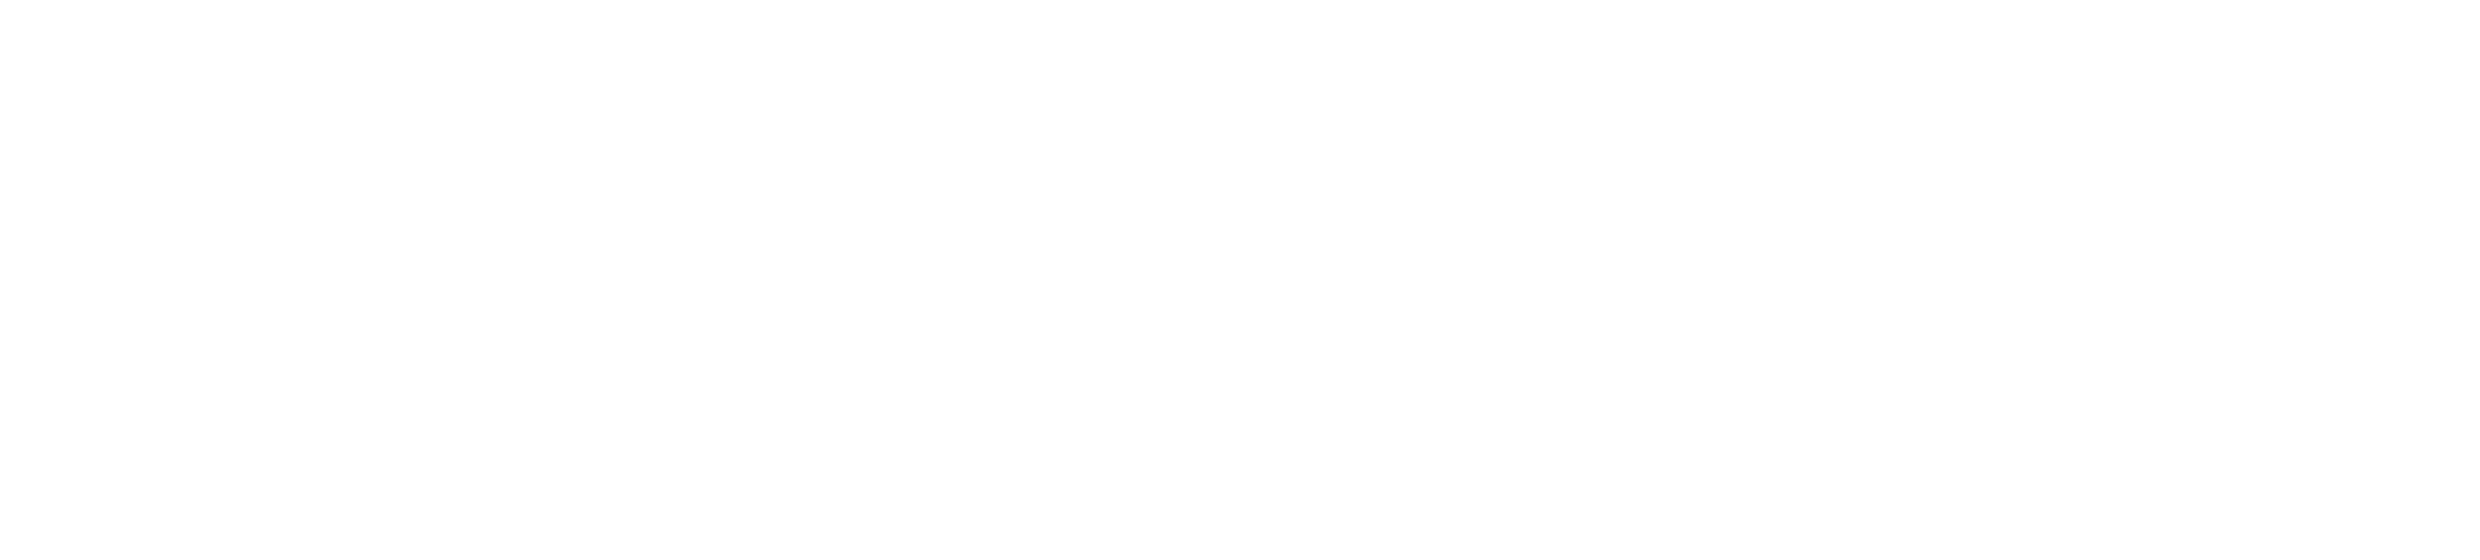 Beyond Insights Investment & Trading Education